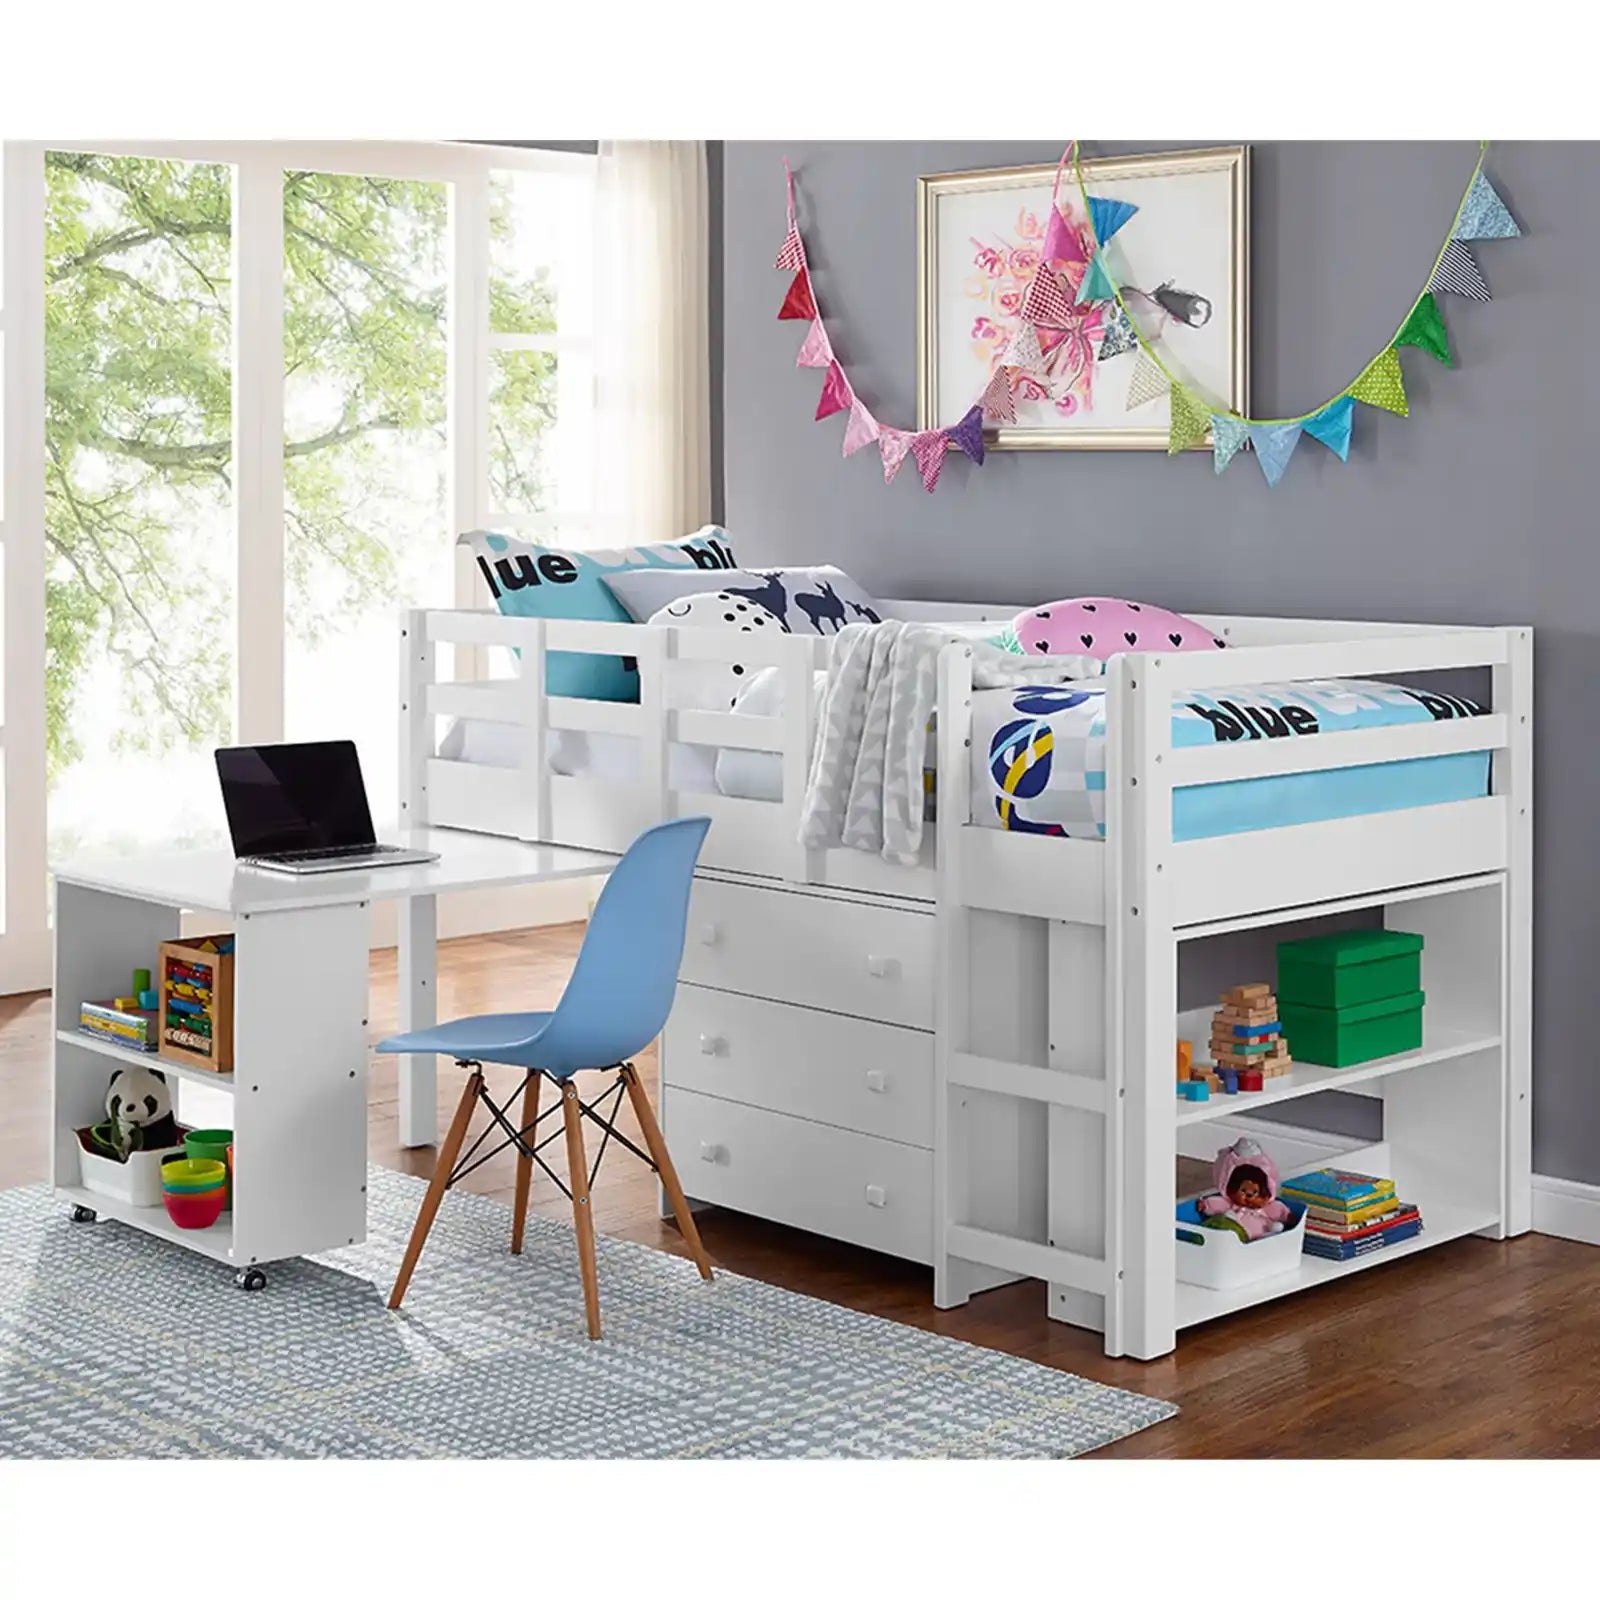 Twin Size Bed with Desk Low Study Kids Loft Bed with Desk and Storage Space